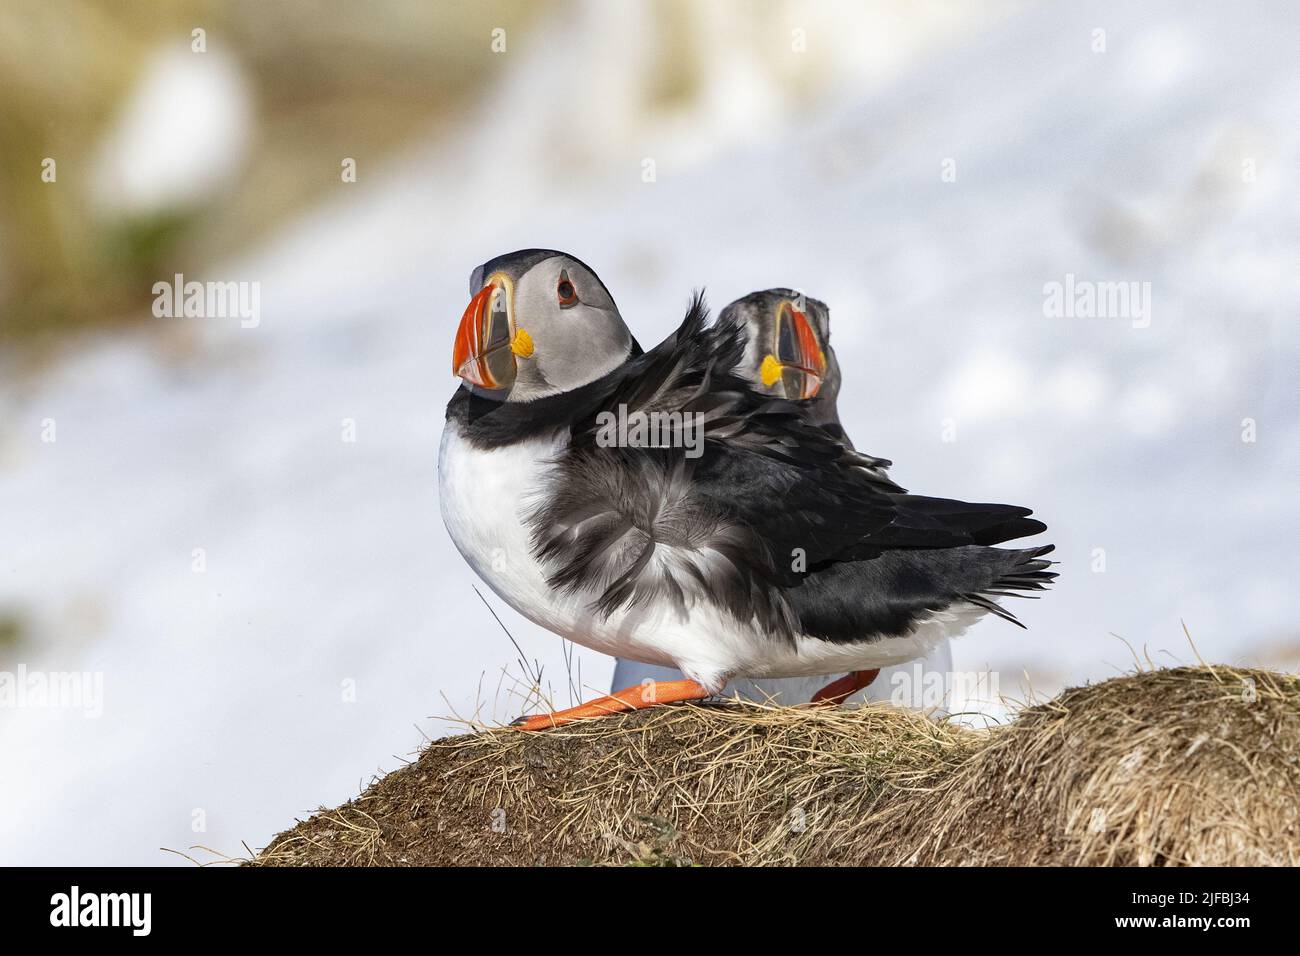 Norway, Varanger Fjord, Vardø or Vardo, Island of Hornøya, protected island with large colonies of seabirds, Atlantic Puffin (Fratercula arctica) ,in the snow Stock Photo